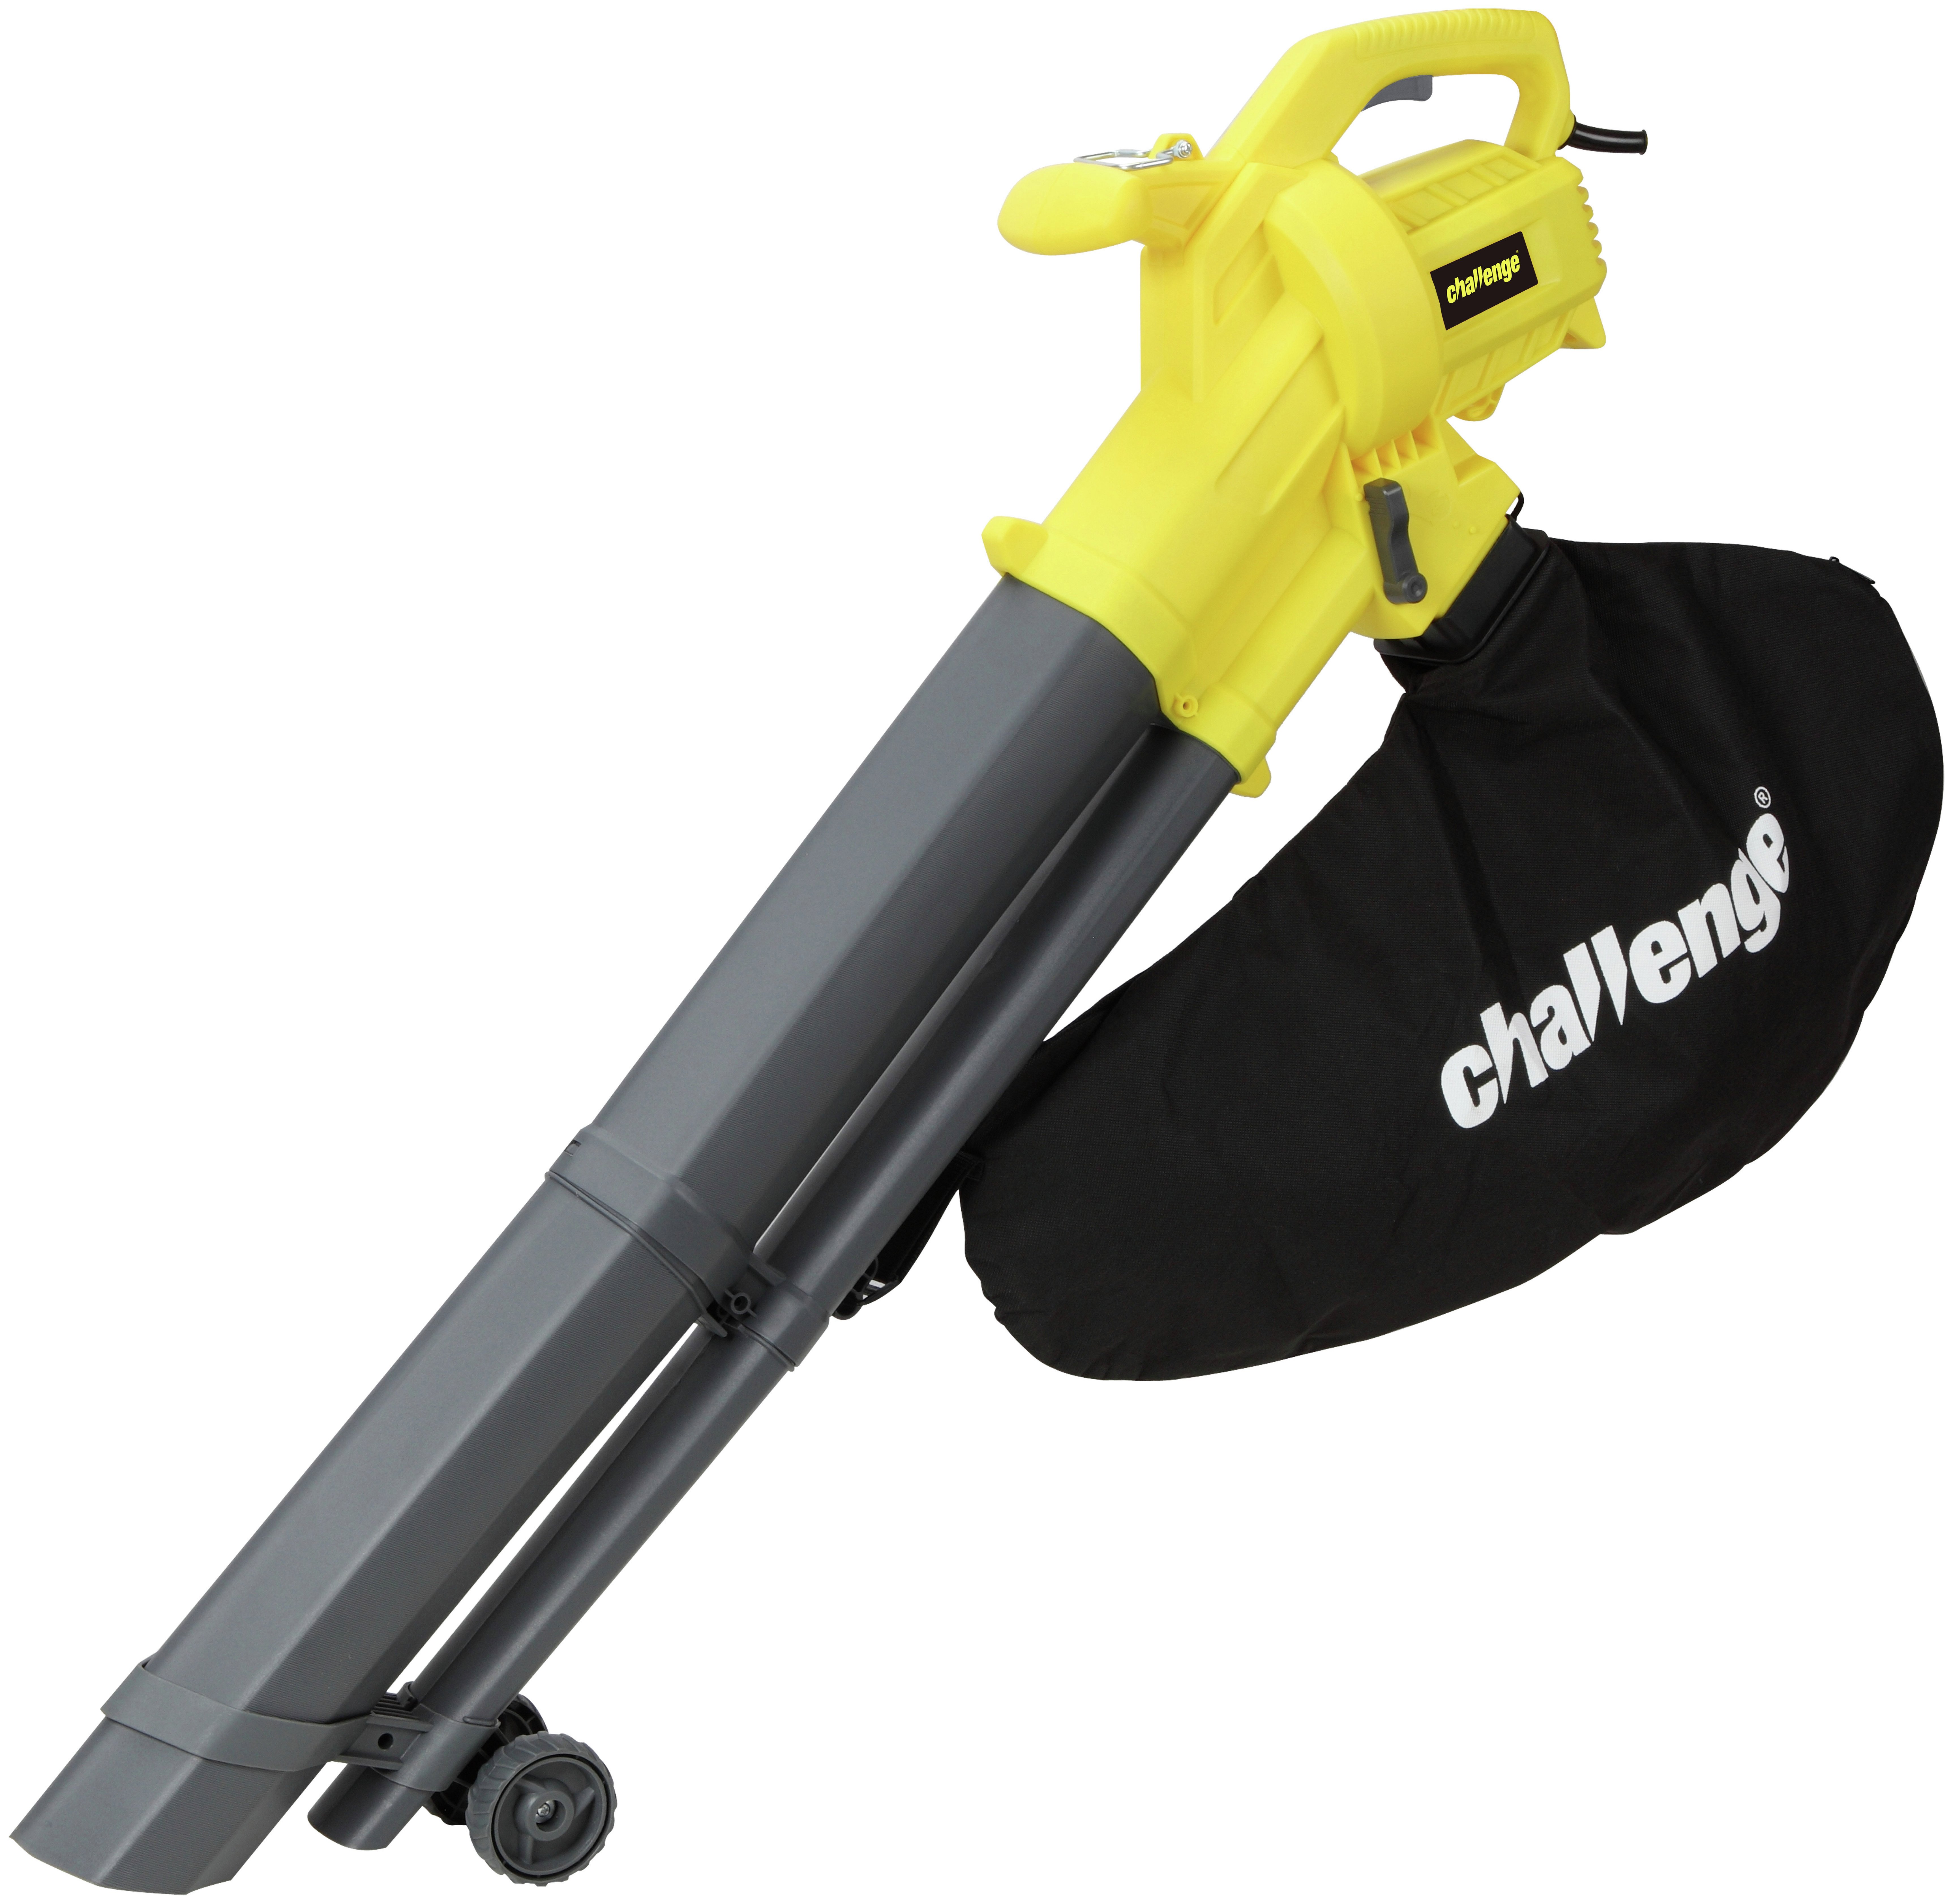 Challenge Corded Leaf Blower and Vac - 2600W